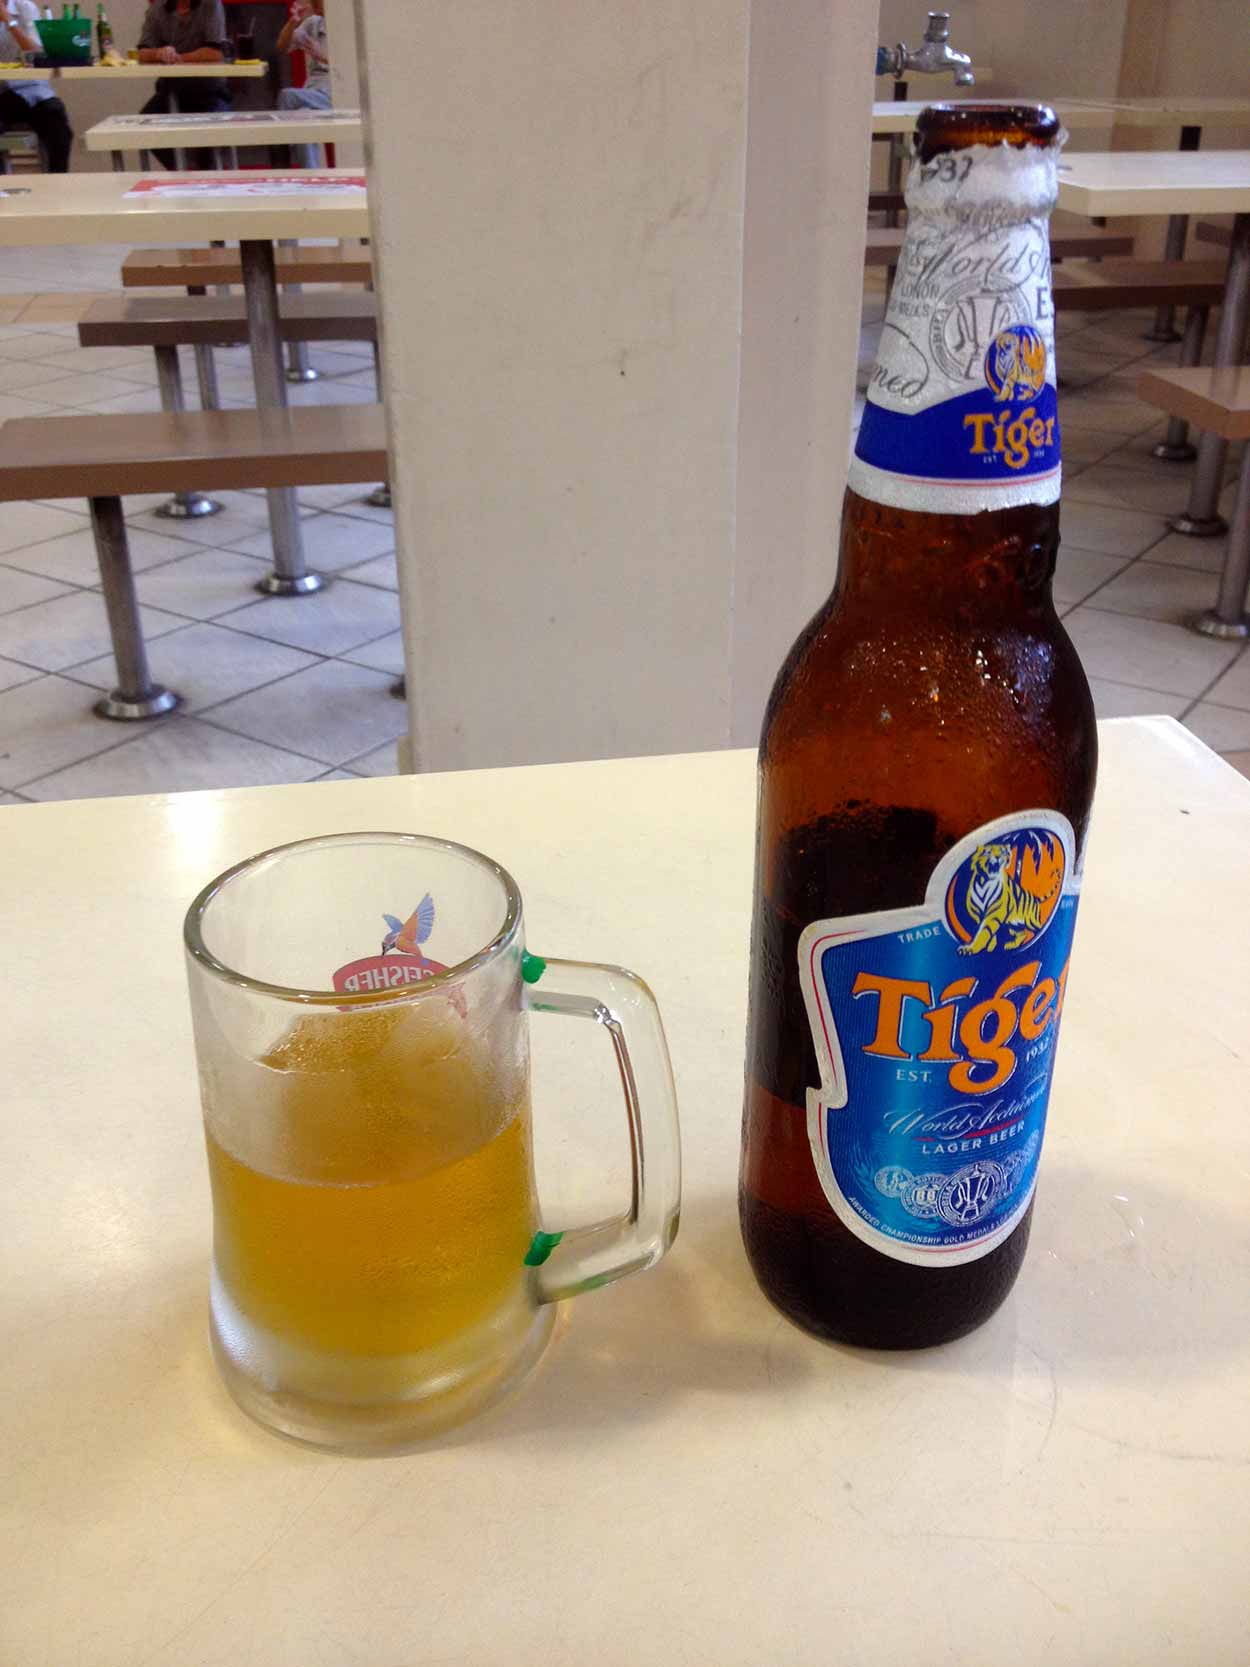 Enjoying a Tiger Beer at the Berseh Food Center, Little India, Singapore